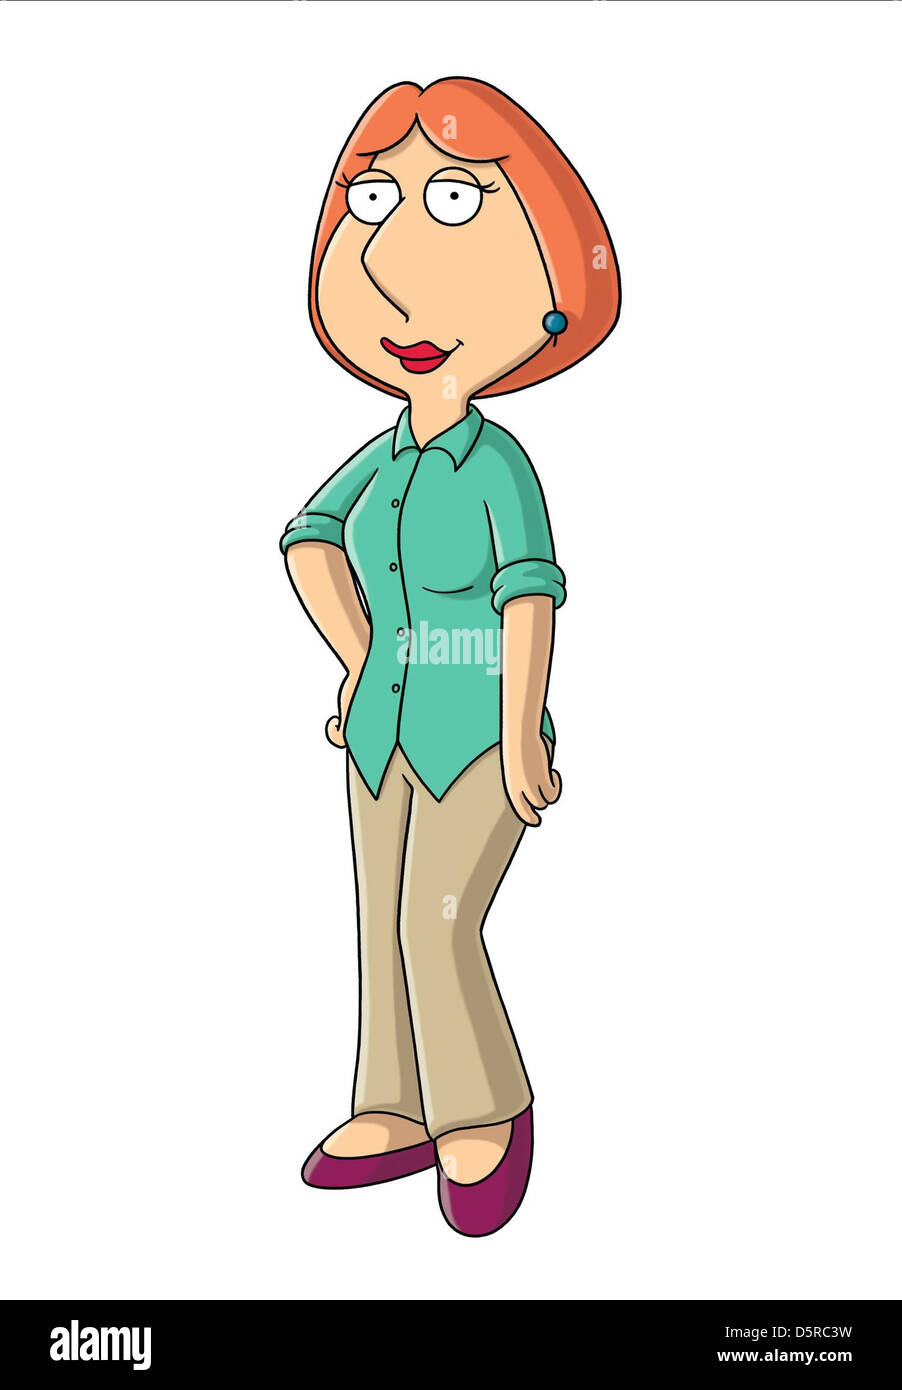 guy family Lois griffin